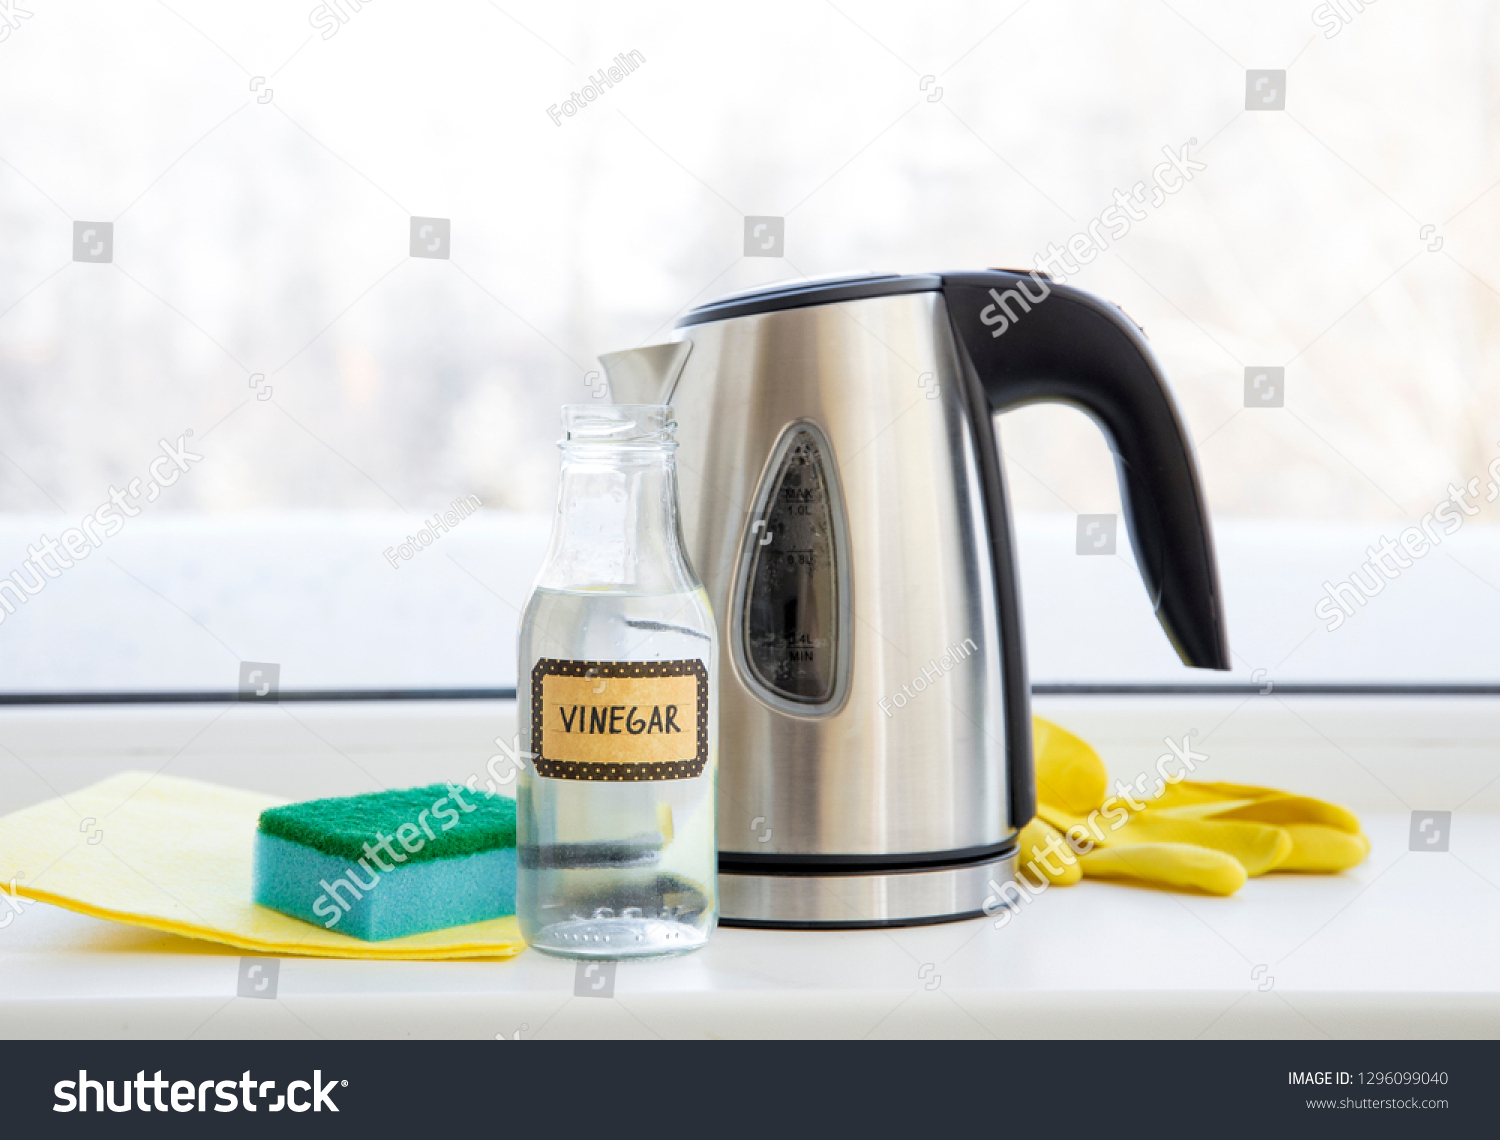 vinegar to clean electric kettle